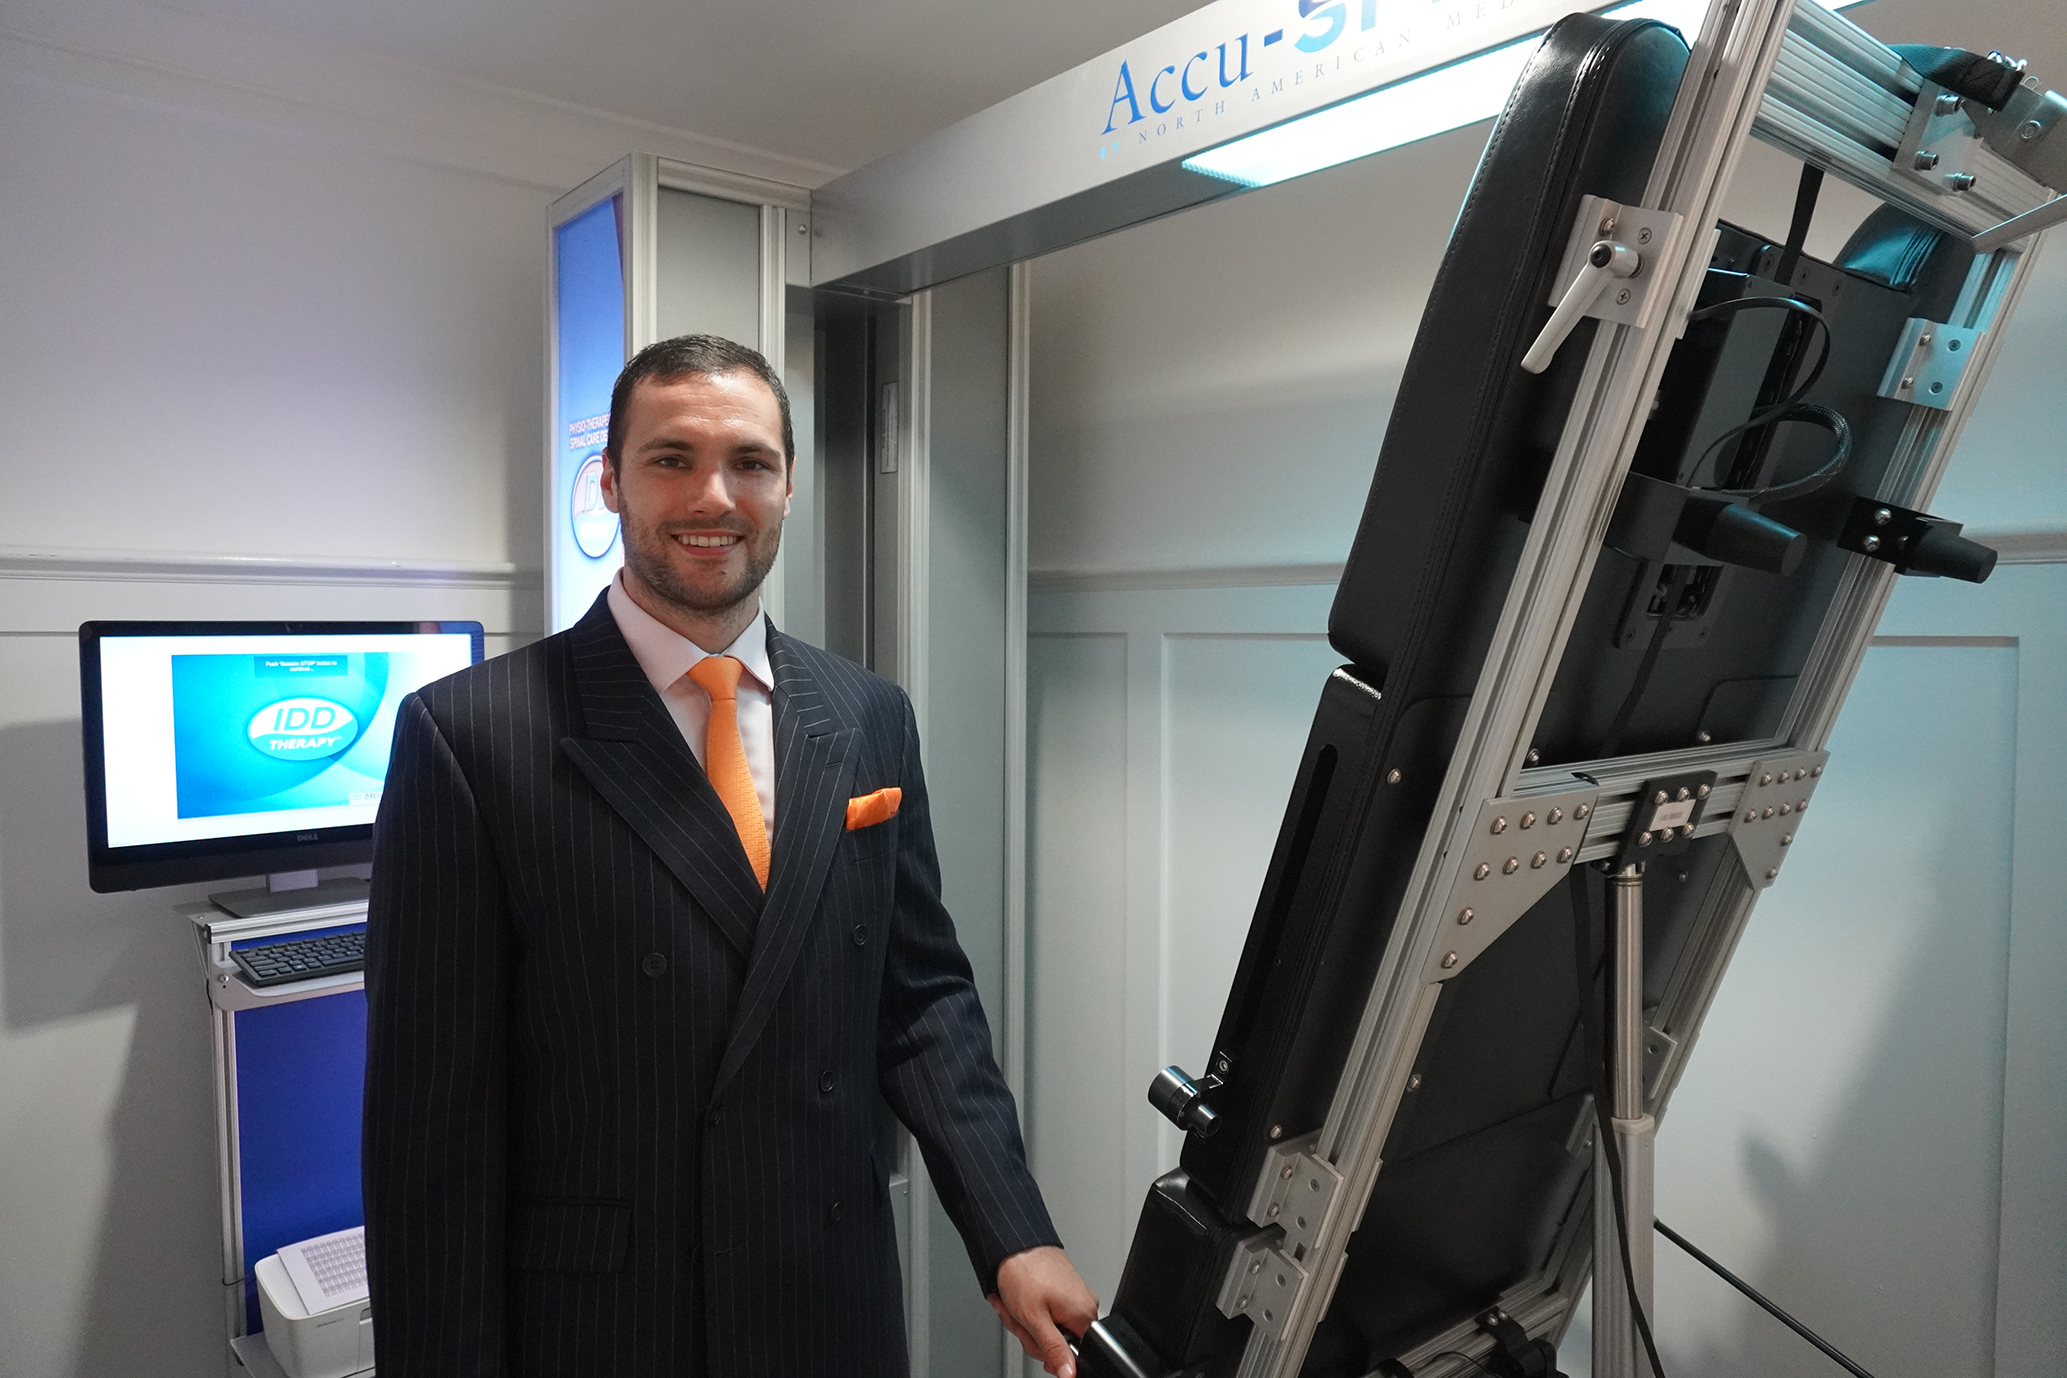 Michael from the Mayfair clinic in front of the IDD machine